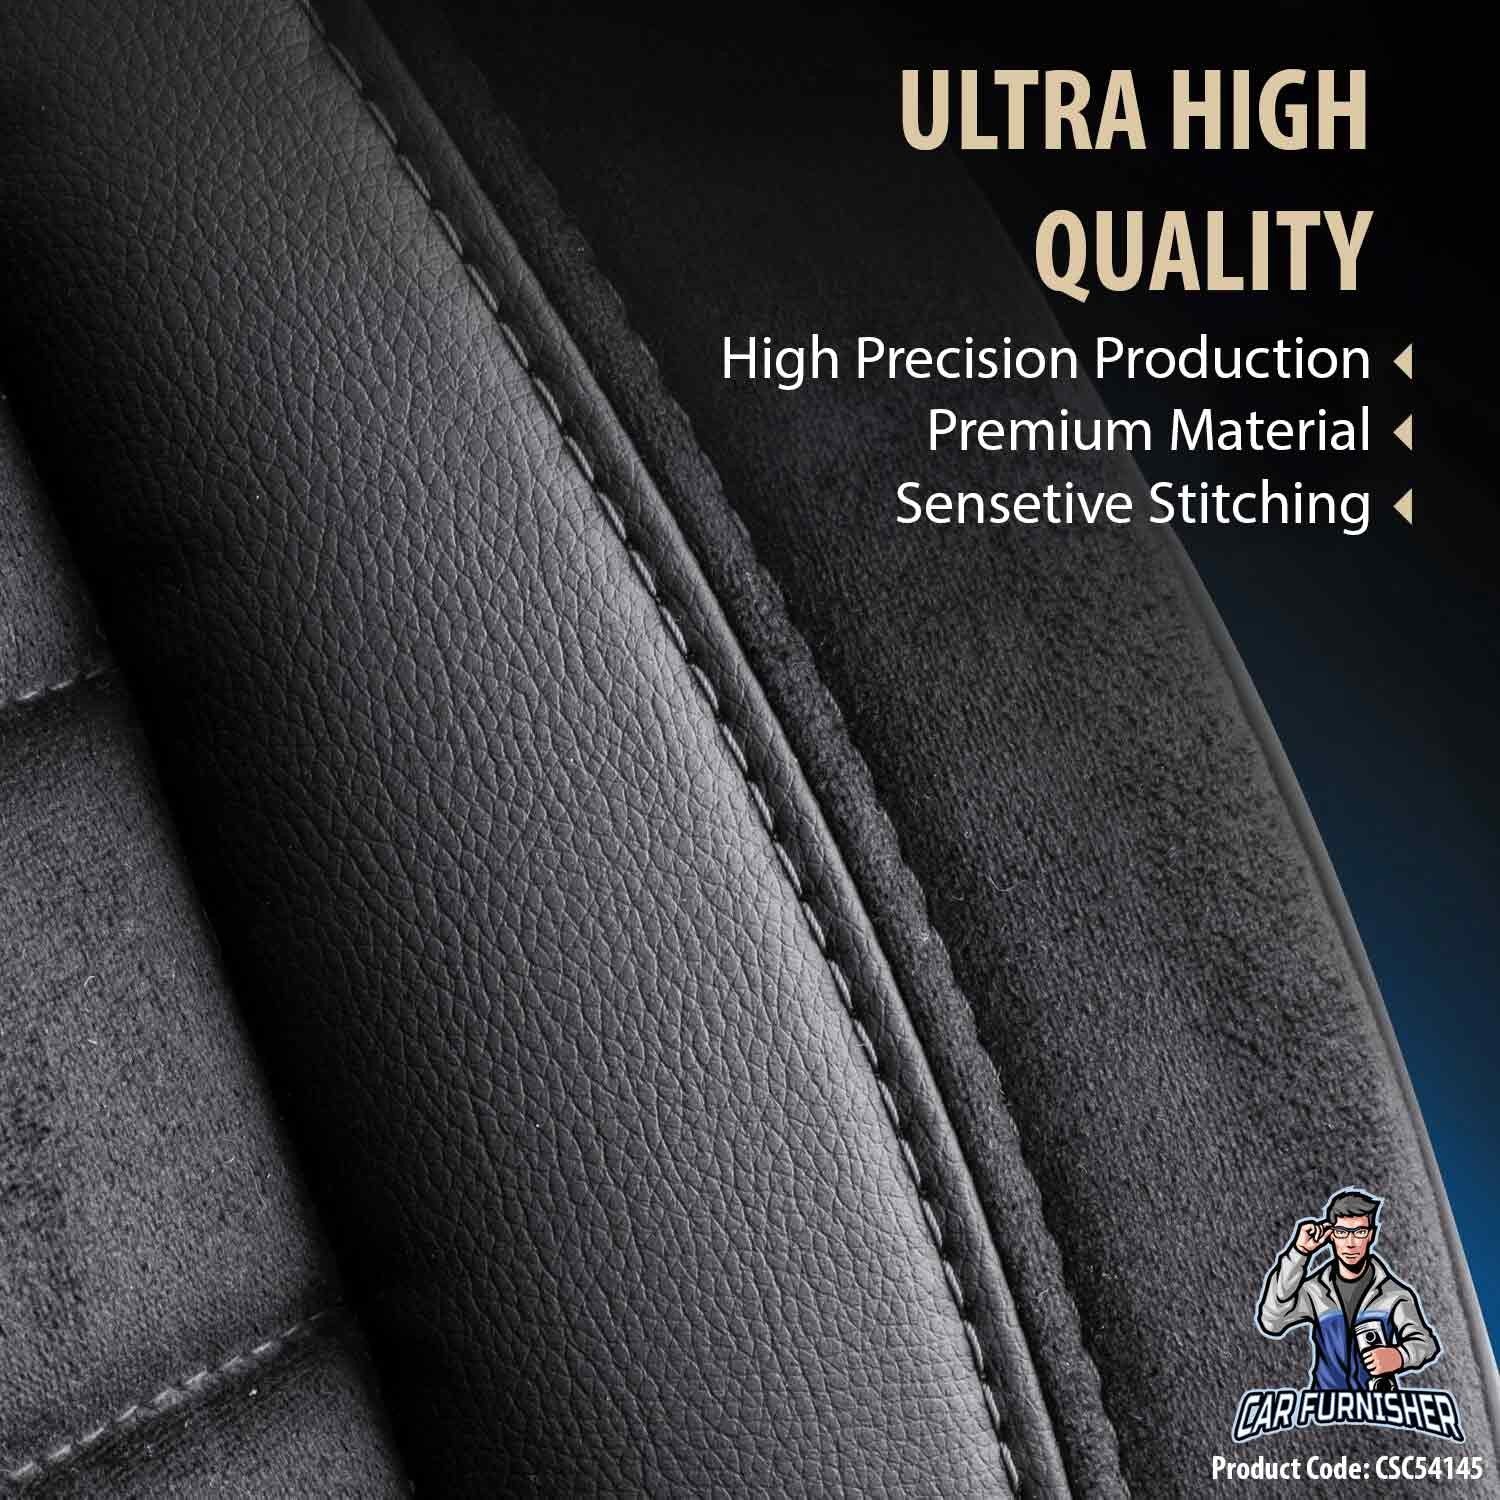 Mercedes 190 Seat Covers Toronto Design Black 5 Seats + Headrests (Full Set) Leather & Suede Fabric